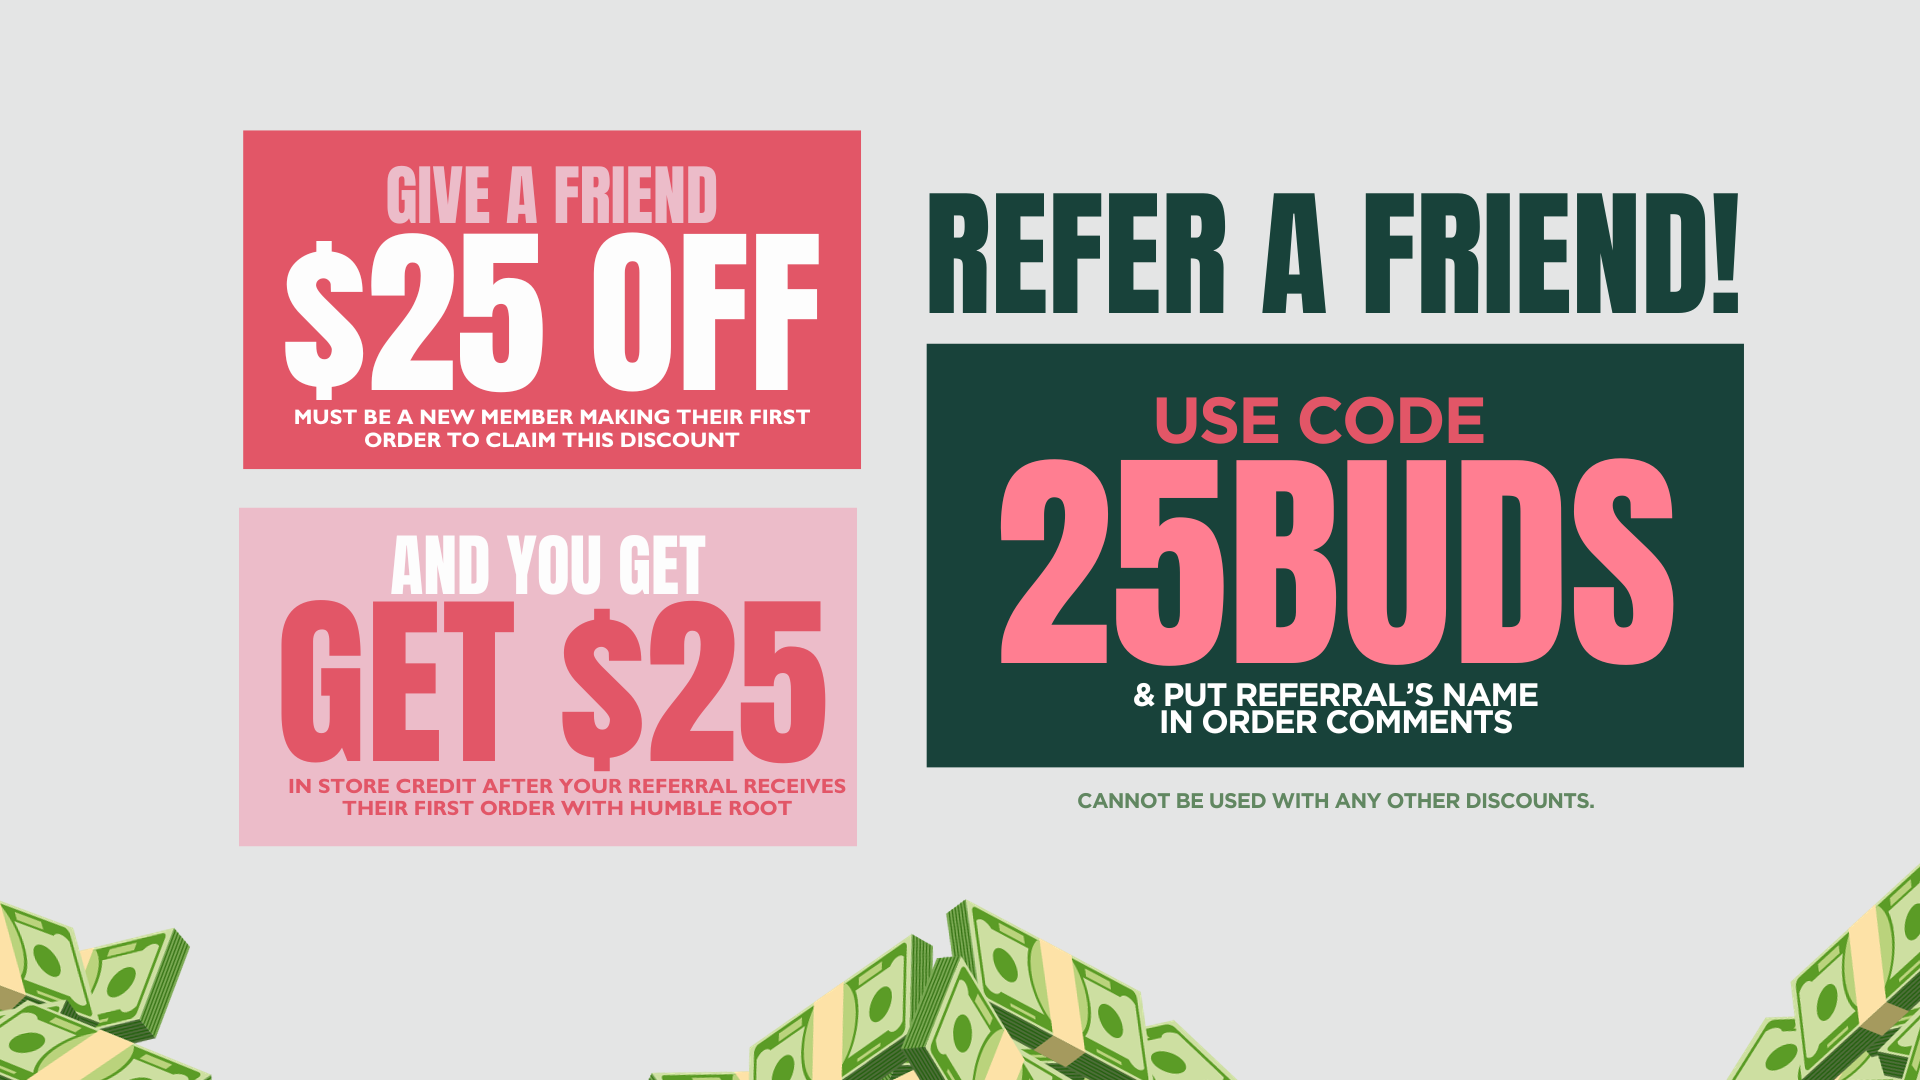 Refer a Friend & Get $25 Each - Humble Root